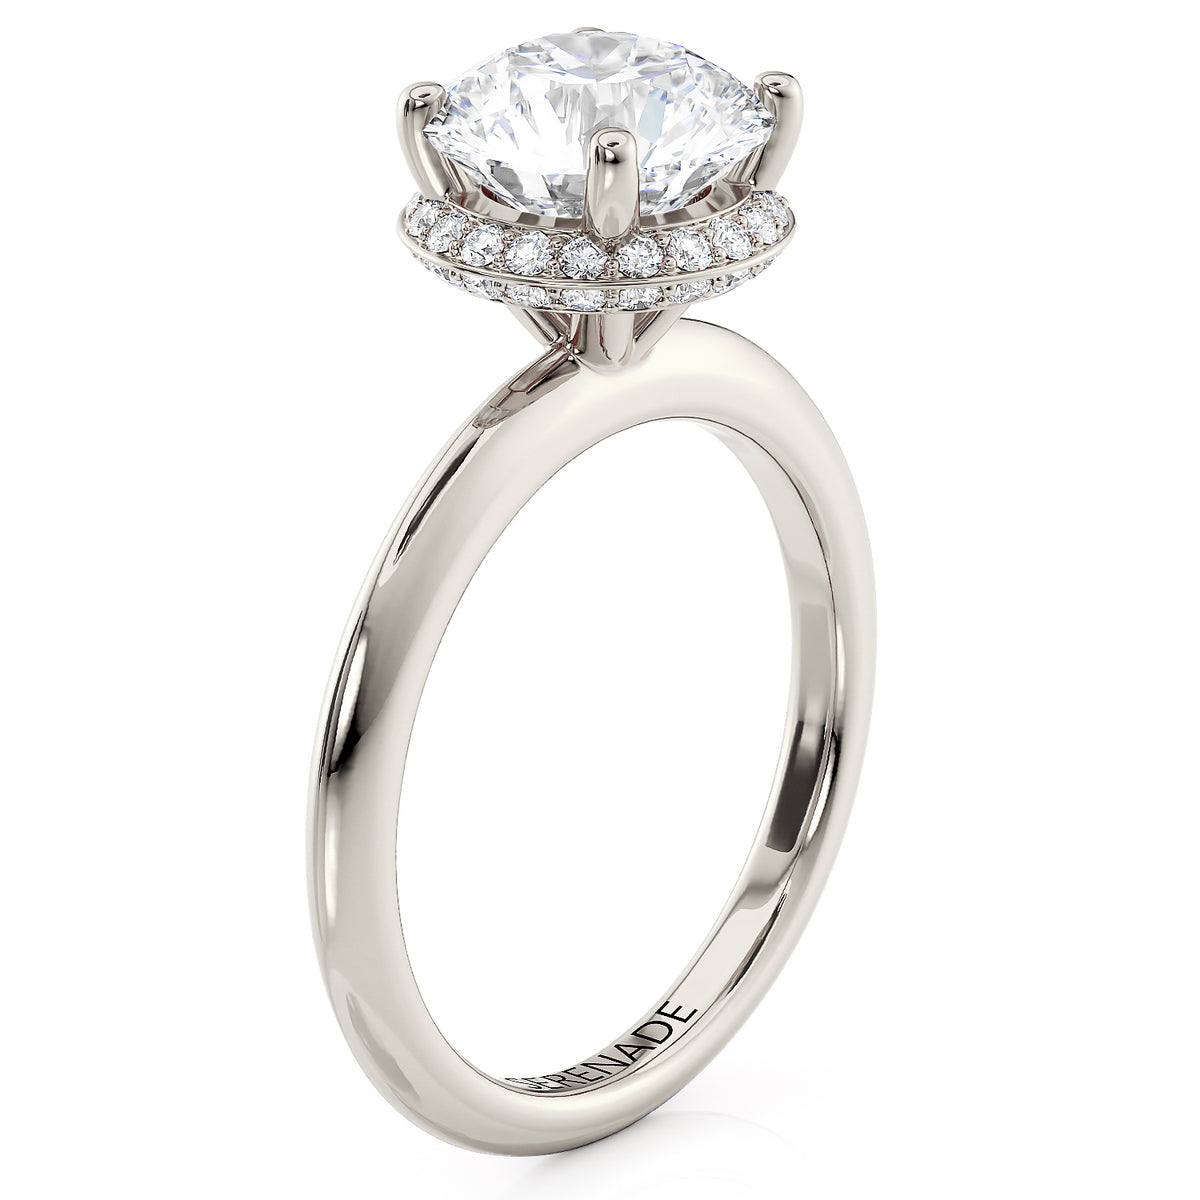 round cushion cut engagement rings solitaire